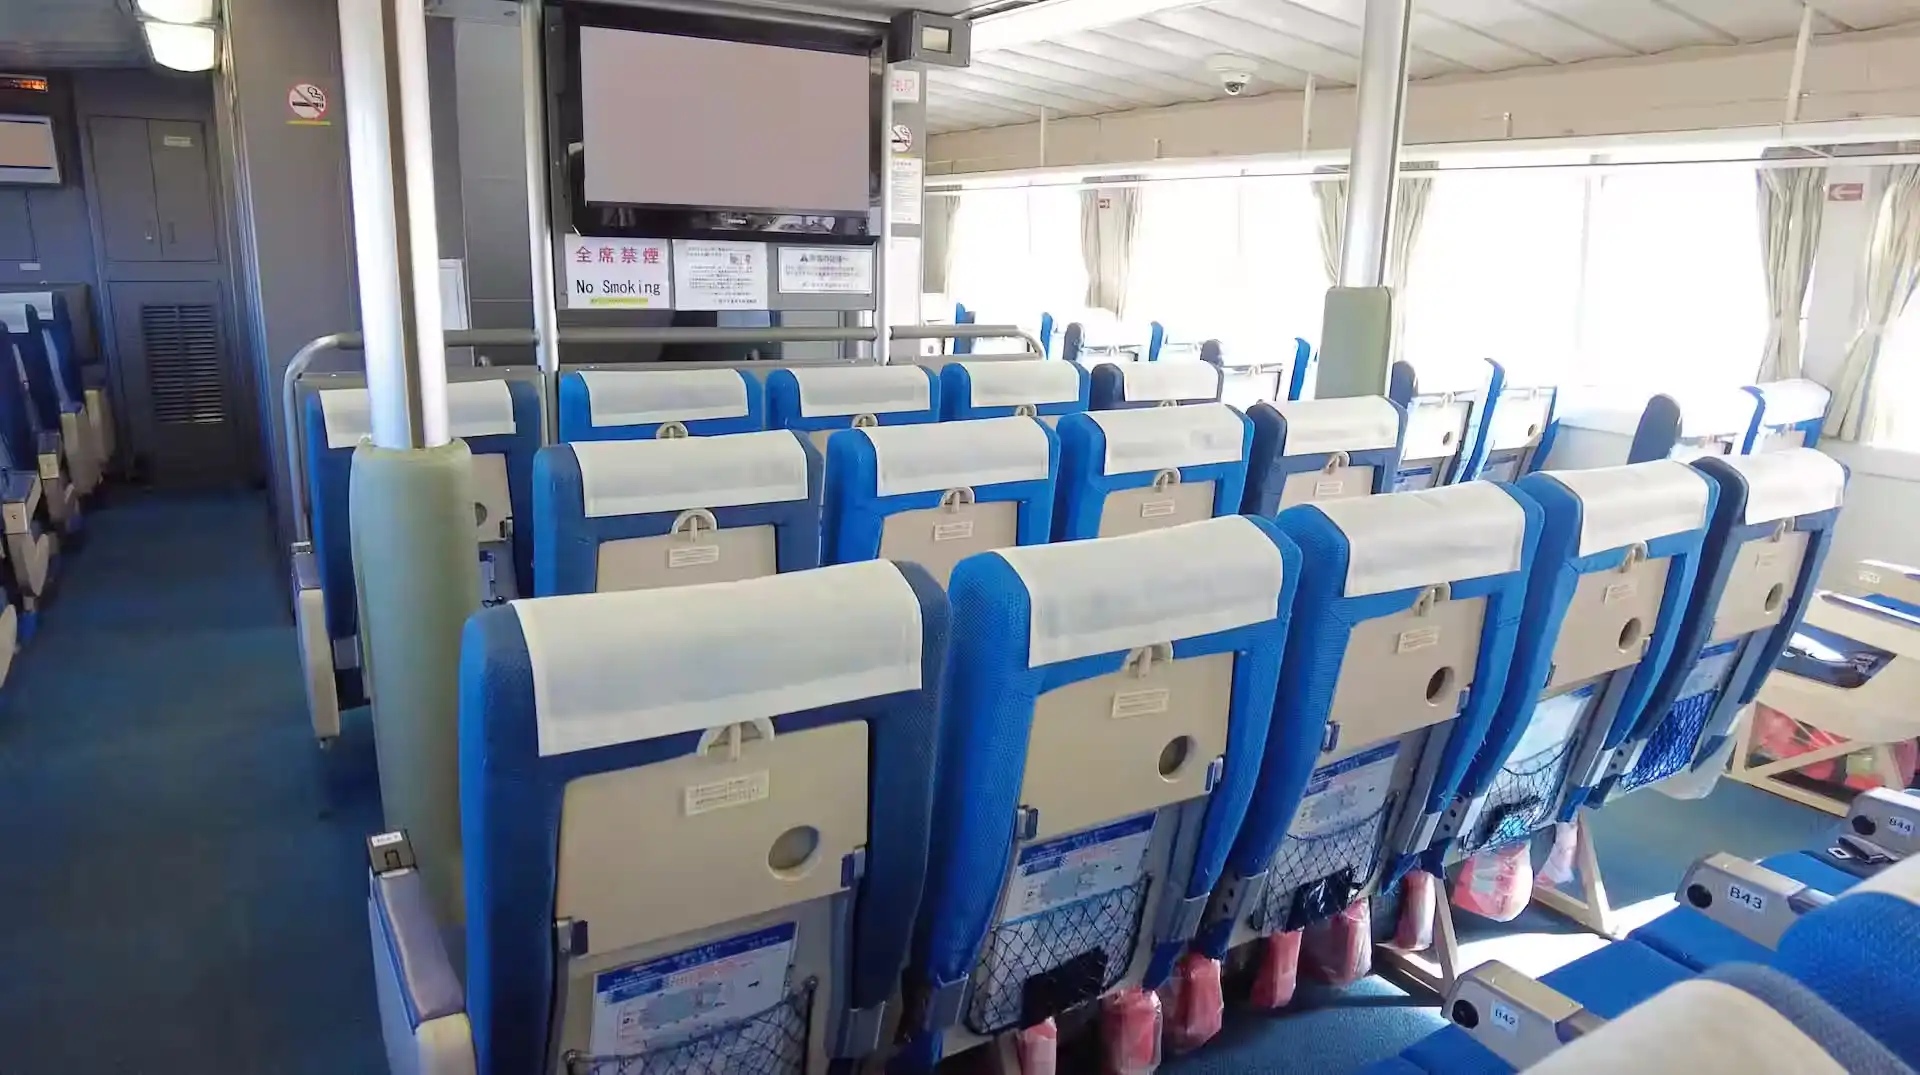 Seating on the second floor of the Tane-Yaku High-Speed Boat Rocket 2